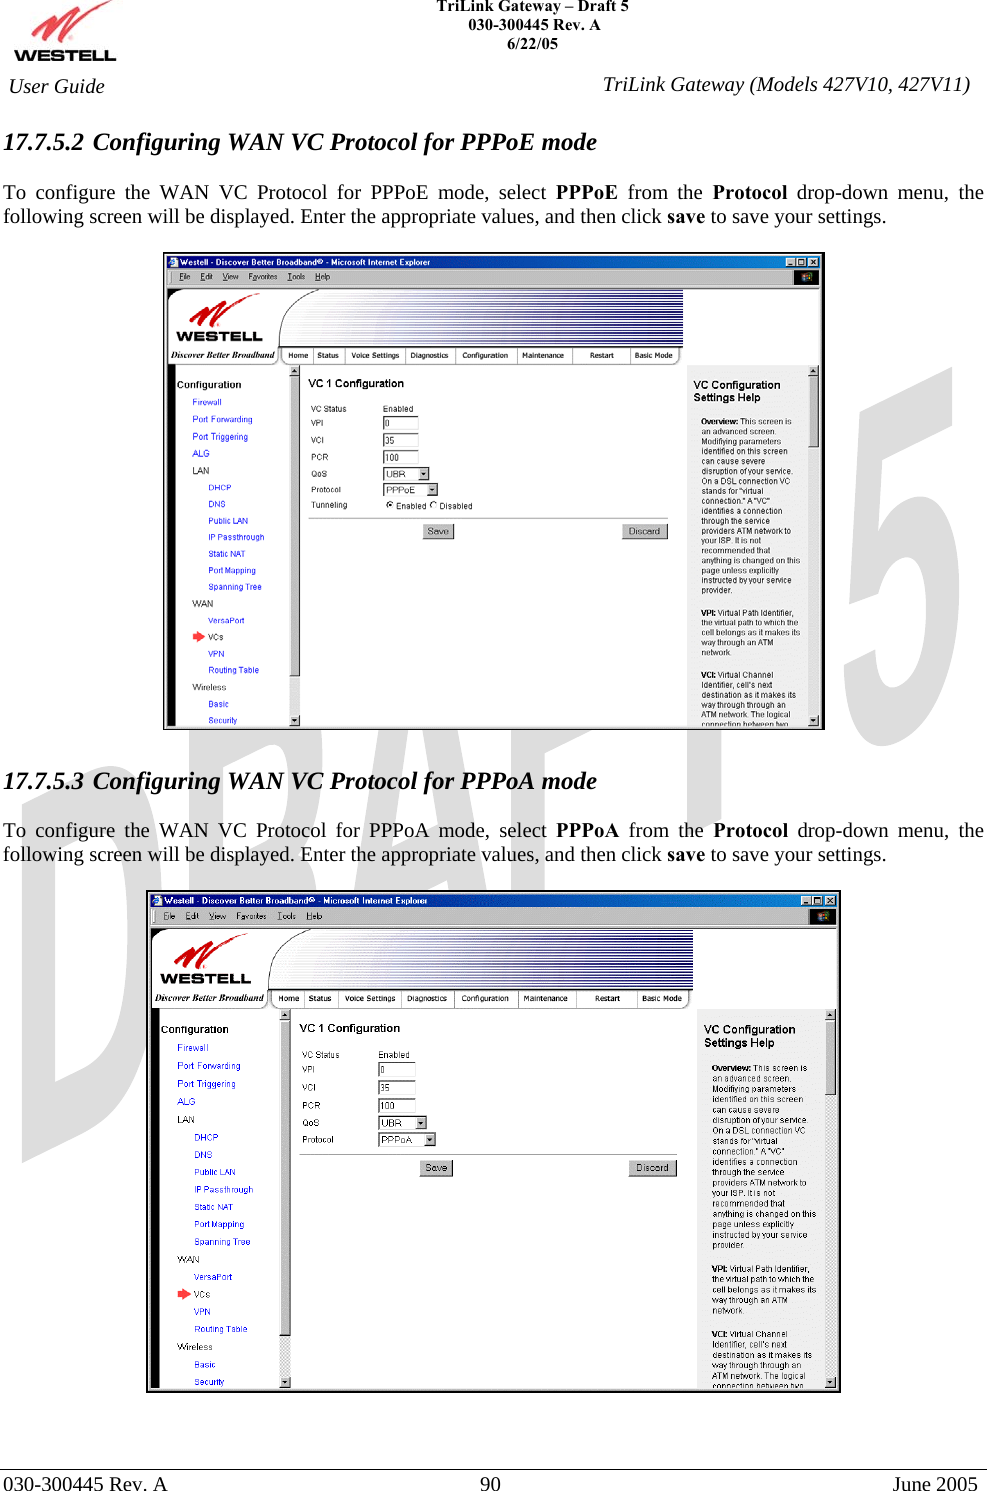    TriLink Gateway – Draft 5   030-300445 Rev. A 6/22/05   030-300445 Rev. A  90  June 2005  User Guide  TriLink Gateway (Models 427V10, 427V11)17.7.5.2 Configuring WAN VC Protocol for PPPoE mode  To configure the WAN VC Protocol for PPPoE mode, select PPPoE from the Protocol drop-down menu, the following screen will be displayed. Enter the appropriate values, and then click save to save your settings.    17.7.5.3 Configuring WAN VC Protocol for PPPoA mode  To configure the WAN VC Protocol for PPPoA mode, select PPPoA from the Protocol drop-down menu, the following screen will be displayed. Enter the appropriate values, and then click save to save your settings.      